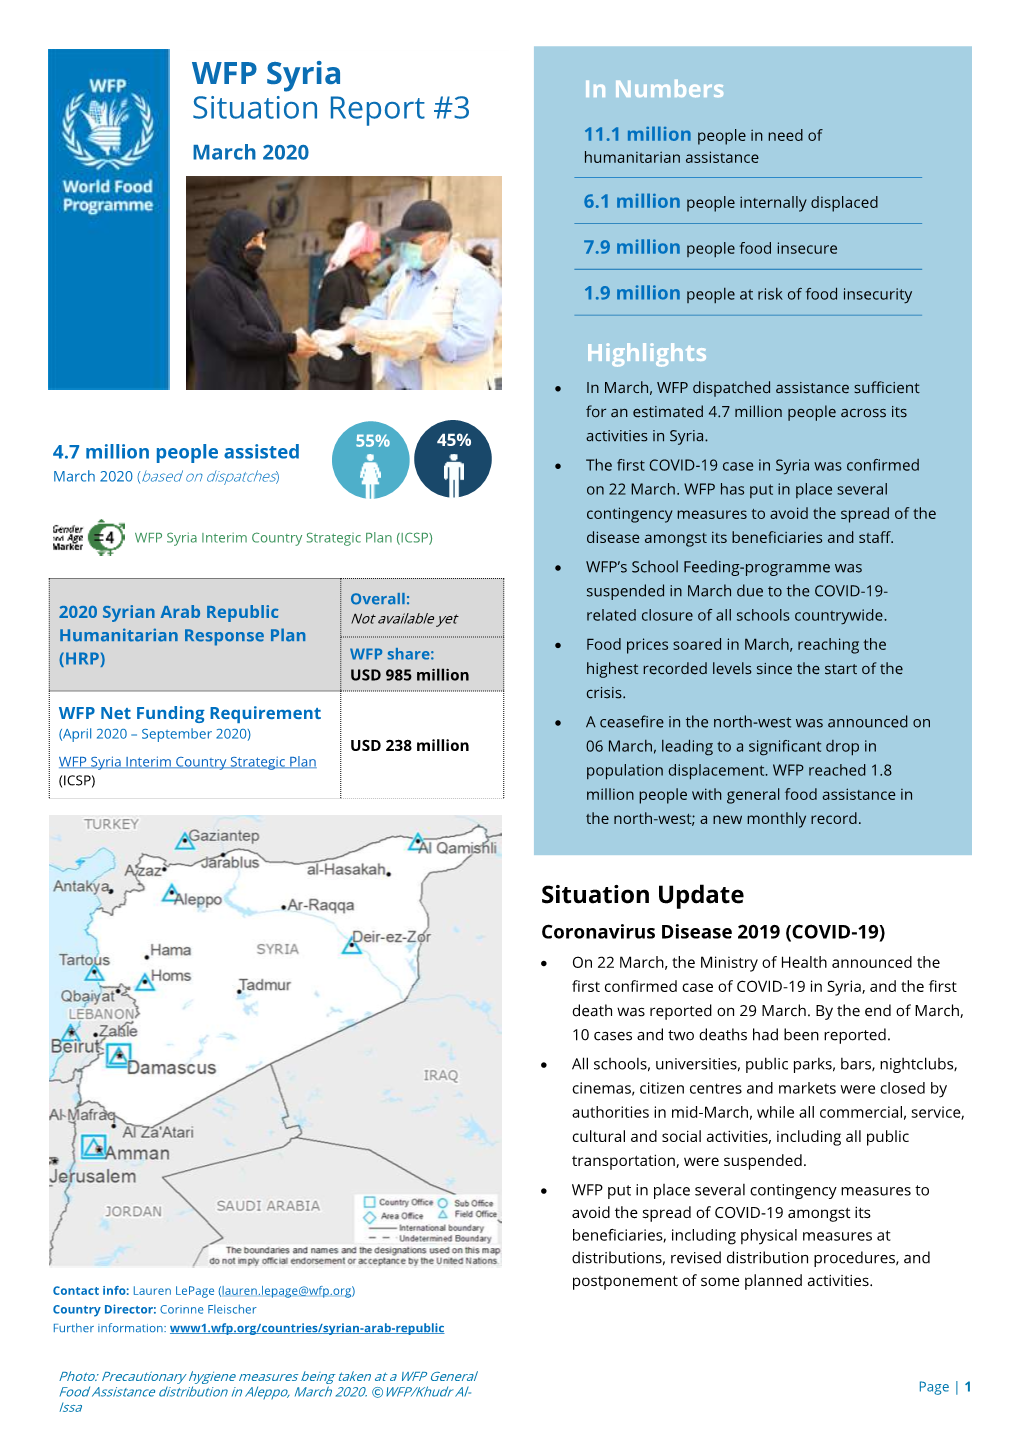 WFP Syria Situation Report #3 Page | 2 March 2020